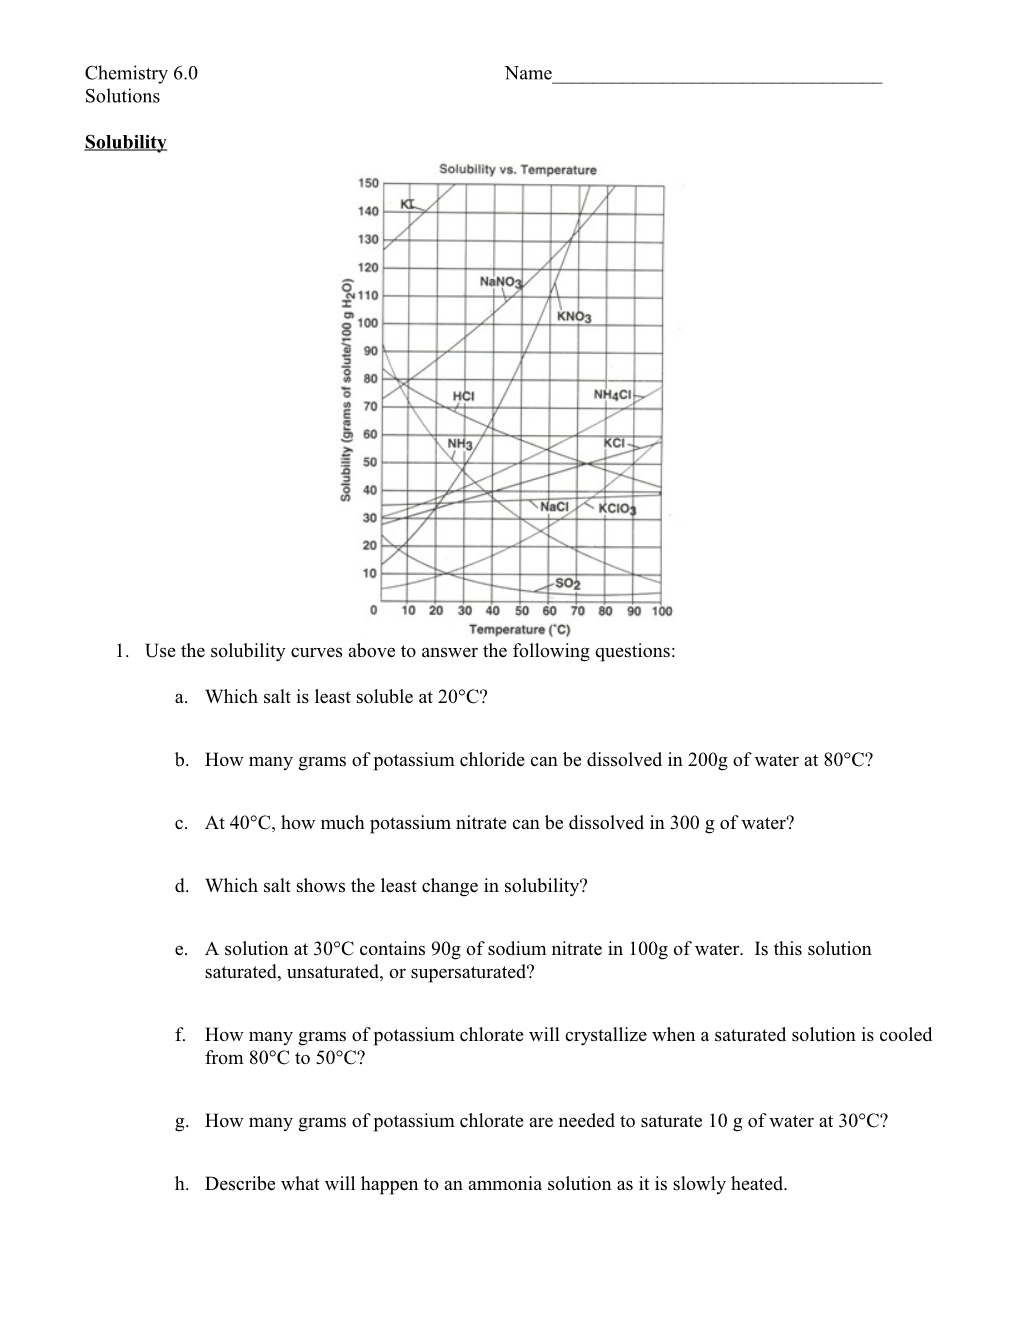 Use the Solubility Curves Above to Answer the Following Questions